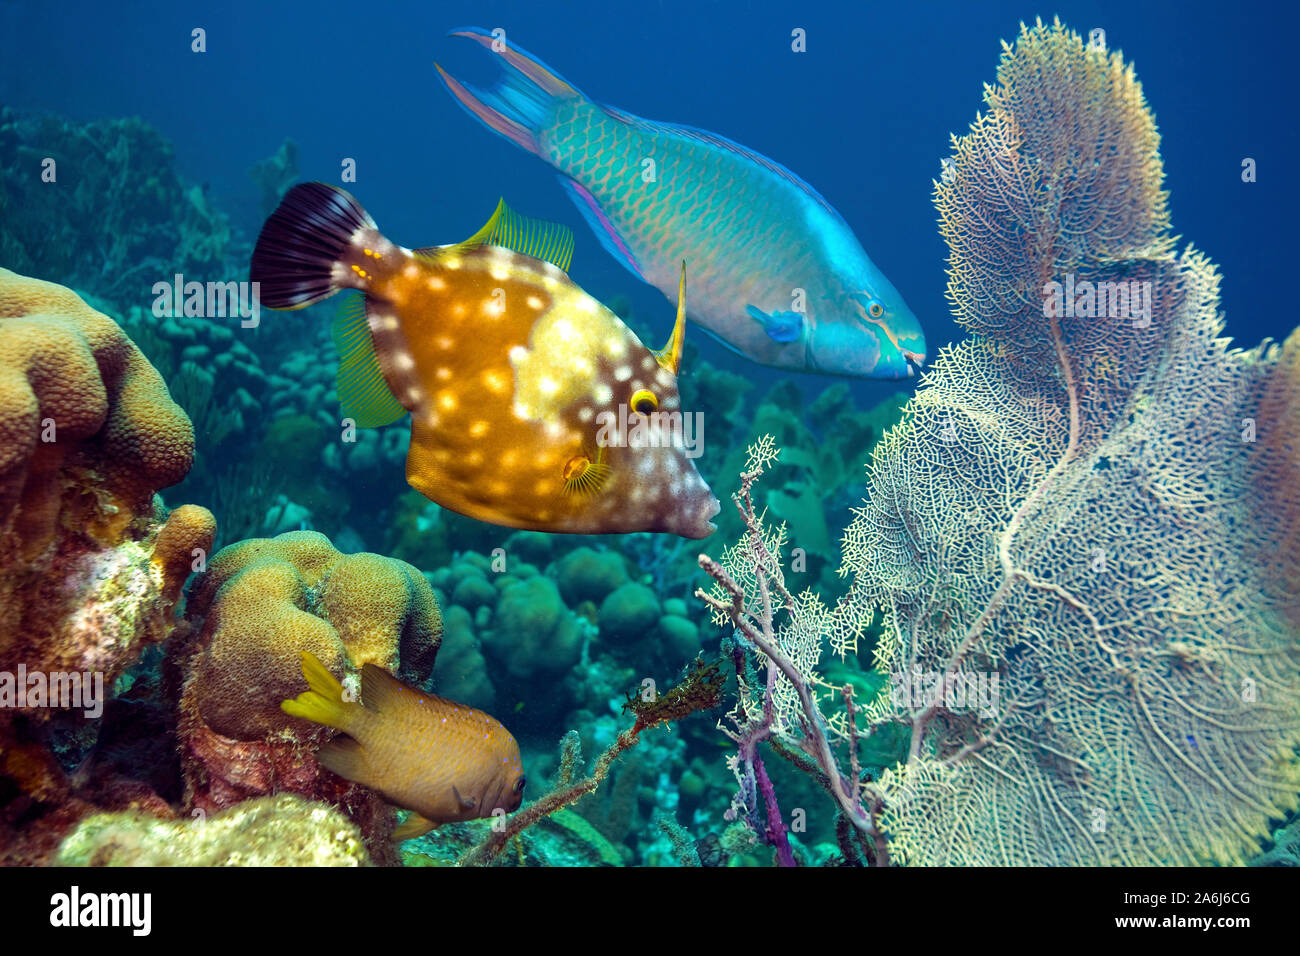 Whitespotted filefish (Cantherhines macrocerus) and a parrotfish (Scaridae), in a caribbean coral reef, Bonaire, Netherland Antilles Stock Photo